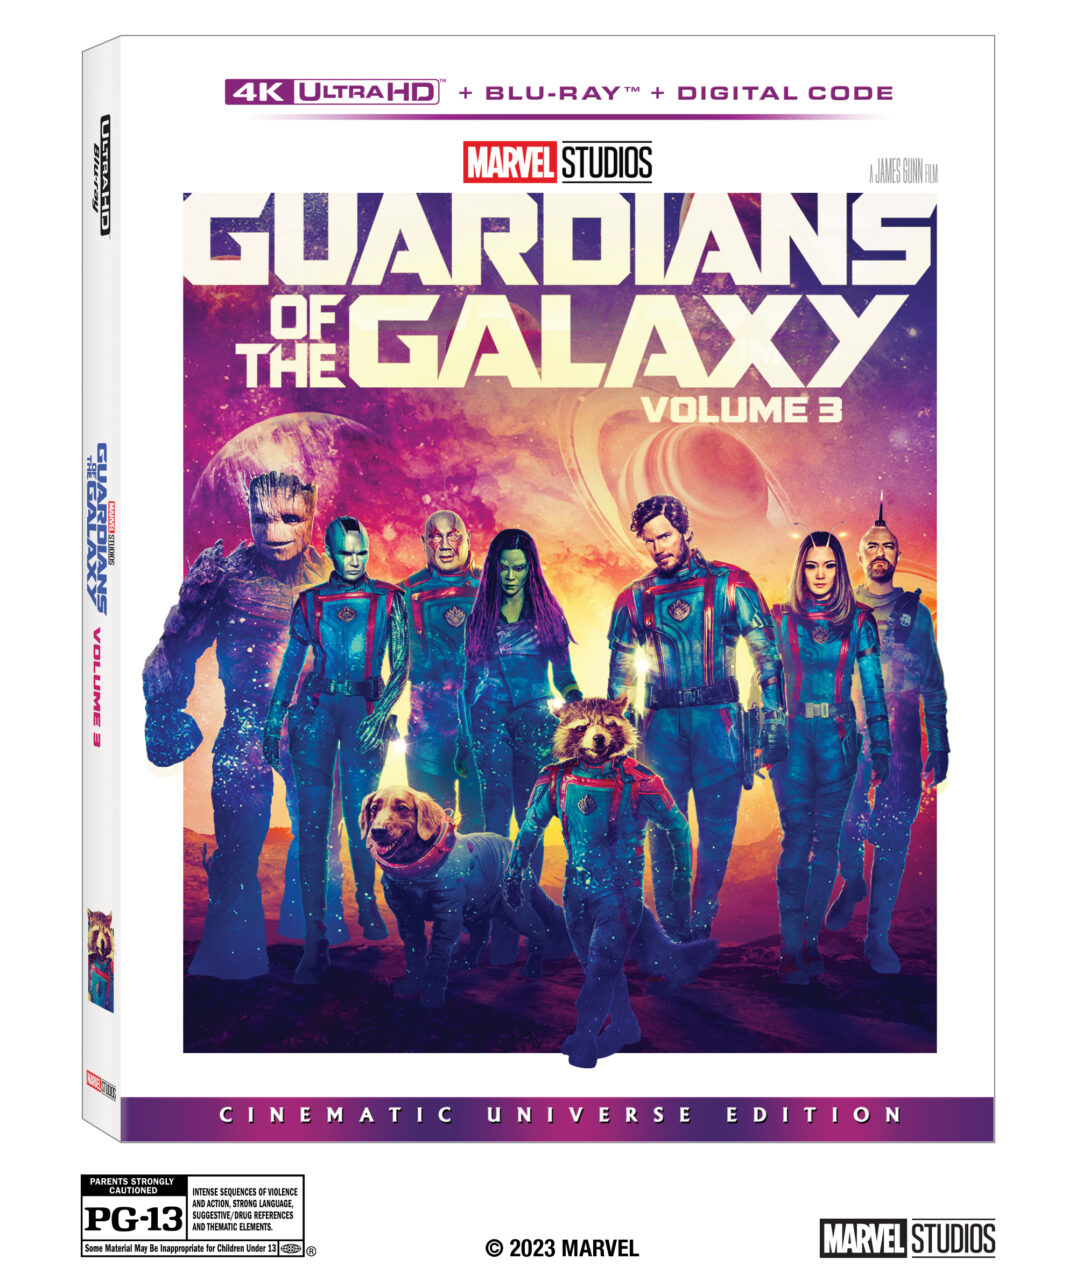 Guardians Of The Galaxy Volume 3 4K Ultra HD Combo Pack cover (Marvel Studios/Walt Disney Home Entertainment)